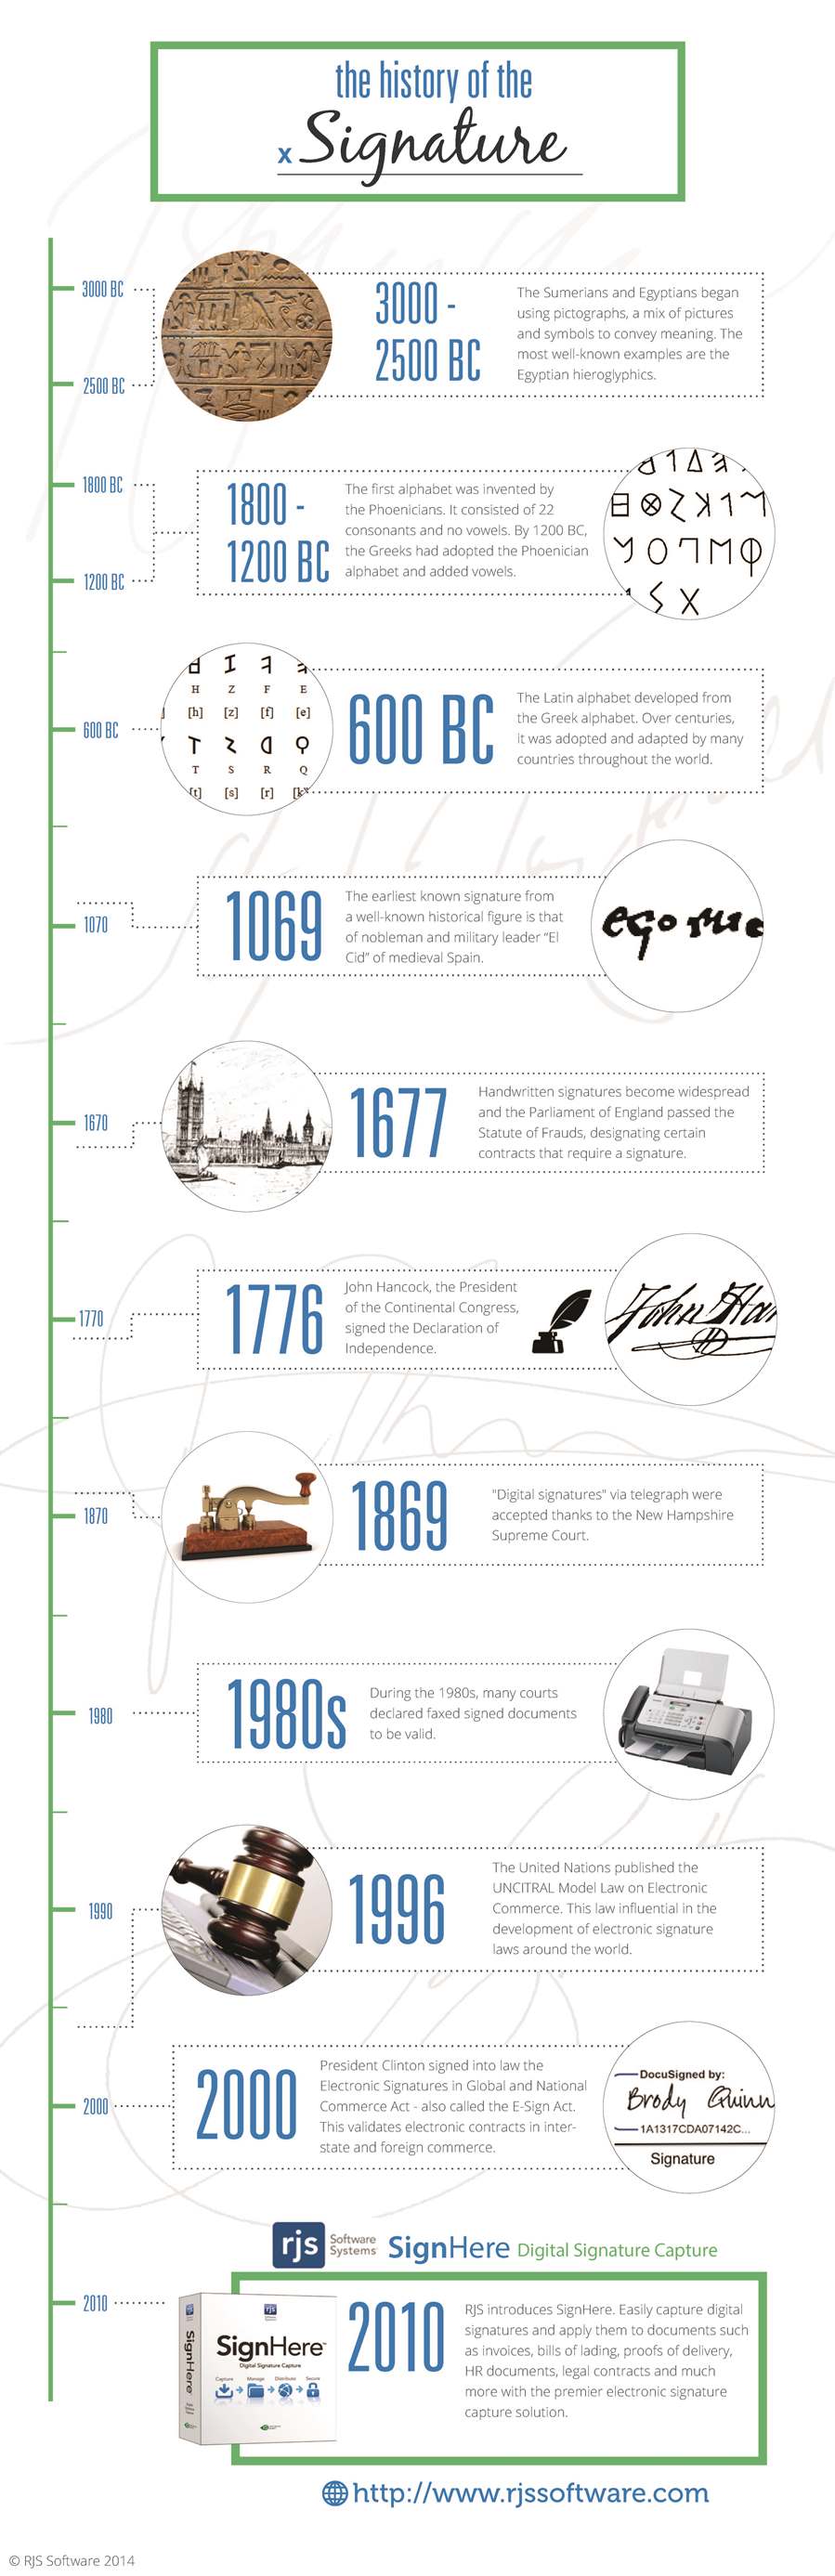 Infographic: the History of the Signature